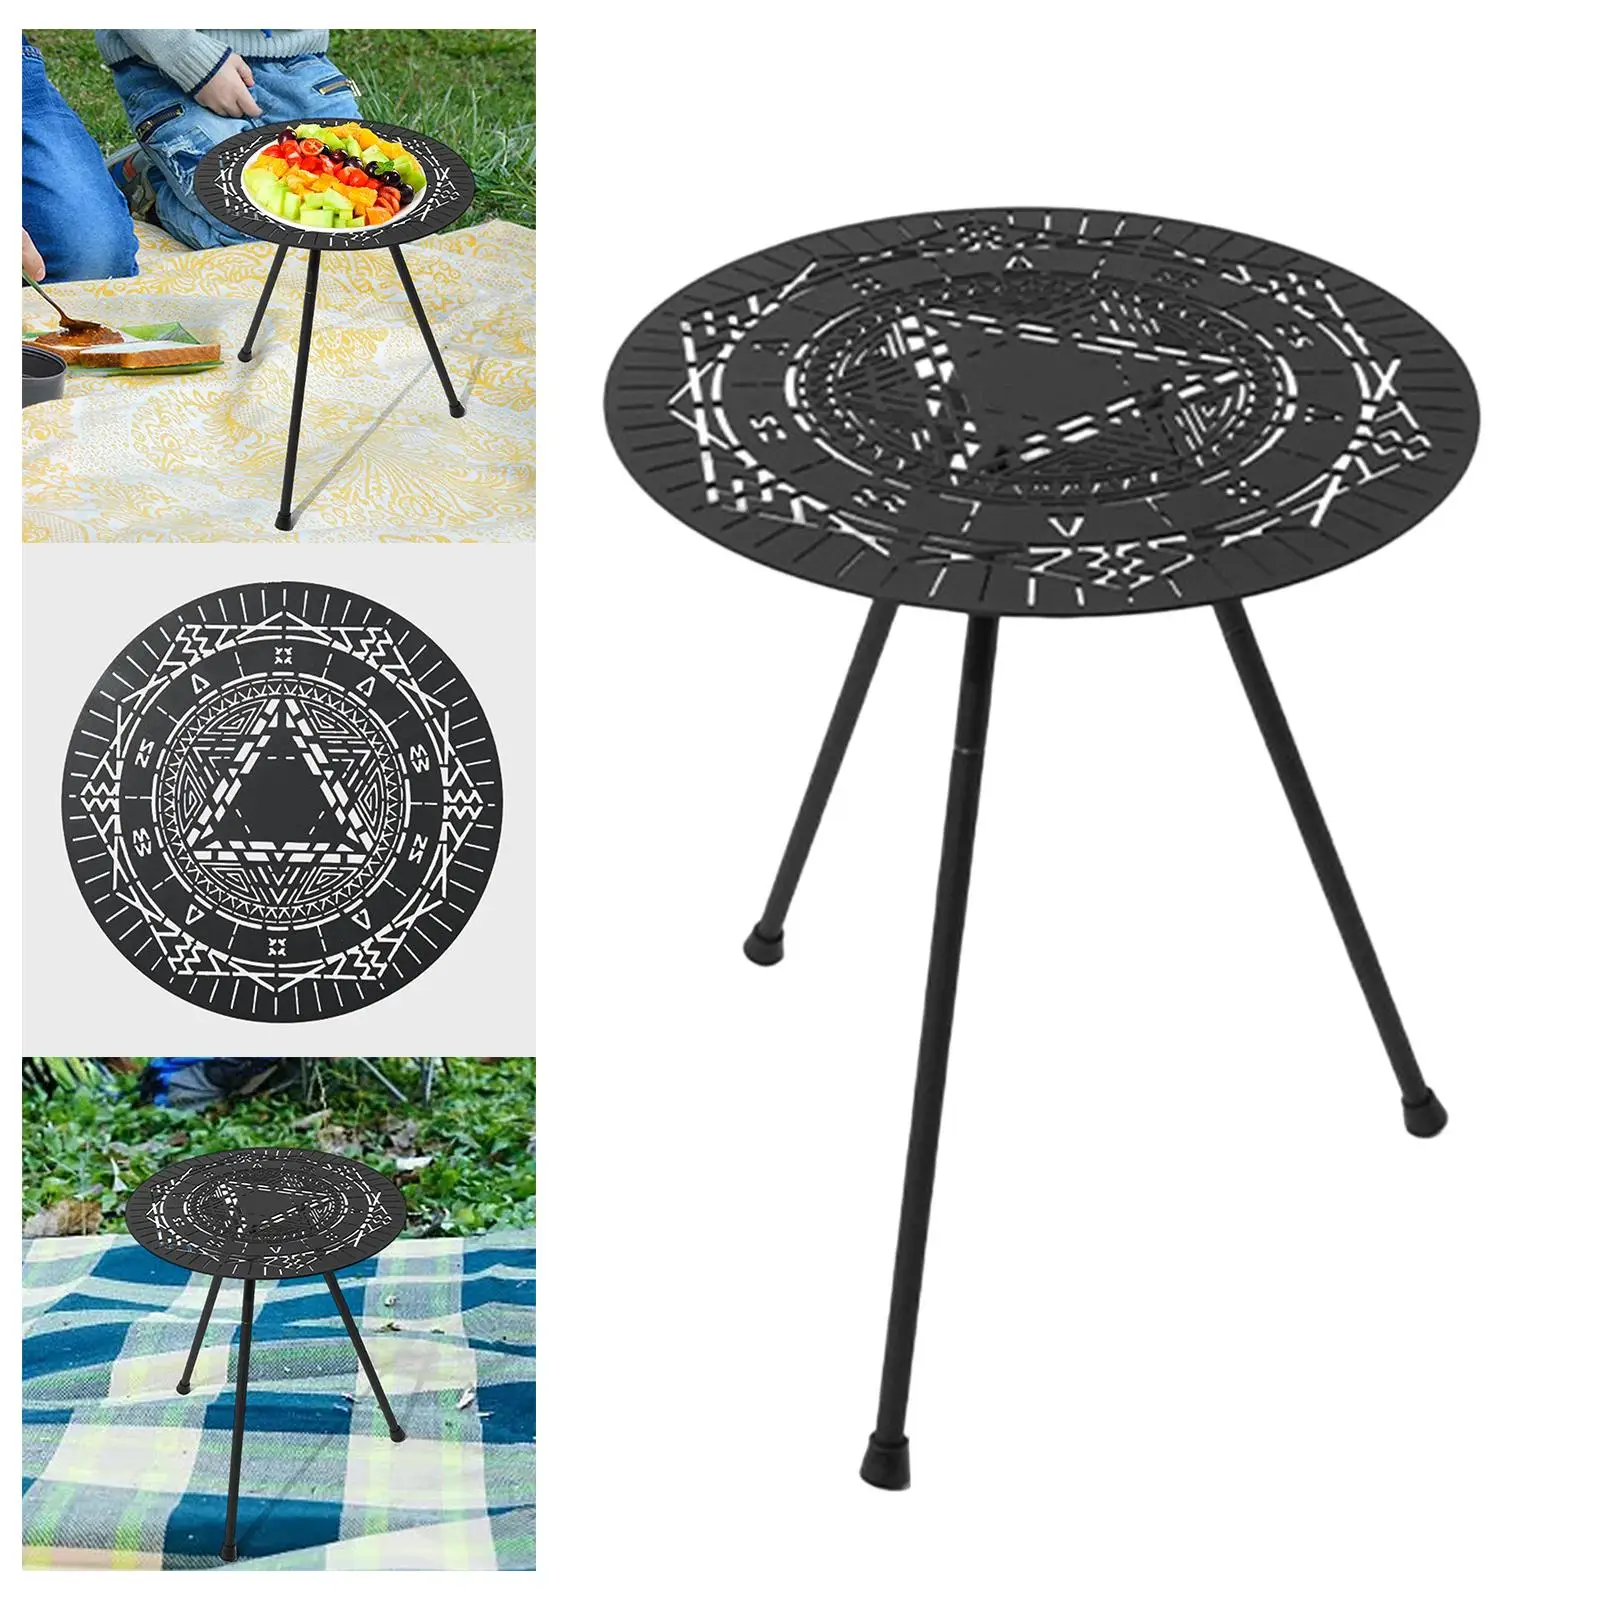 Camping Coffee Table Side Folding Lightweight for Outdoor Garden Barbecue